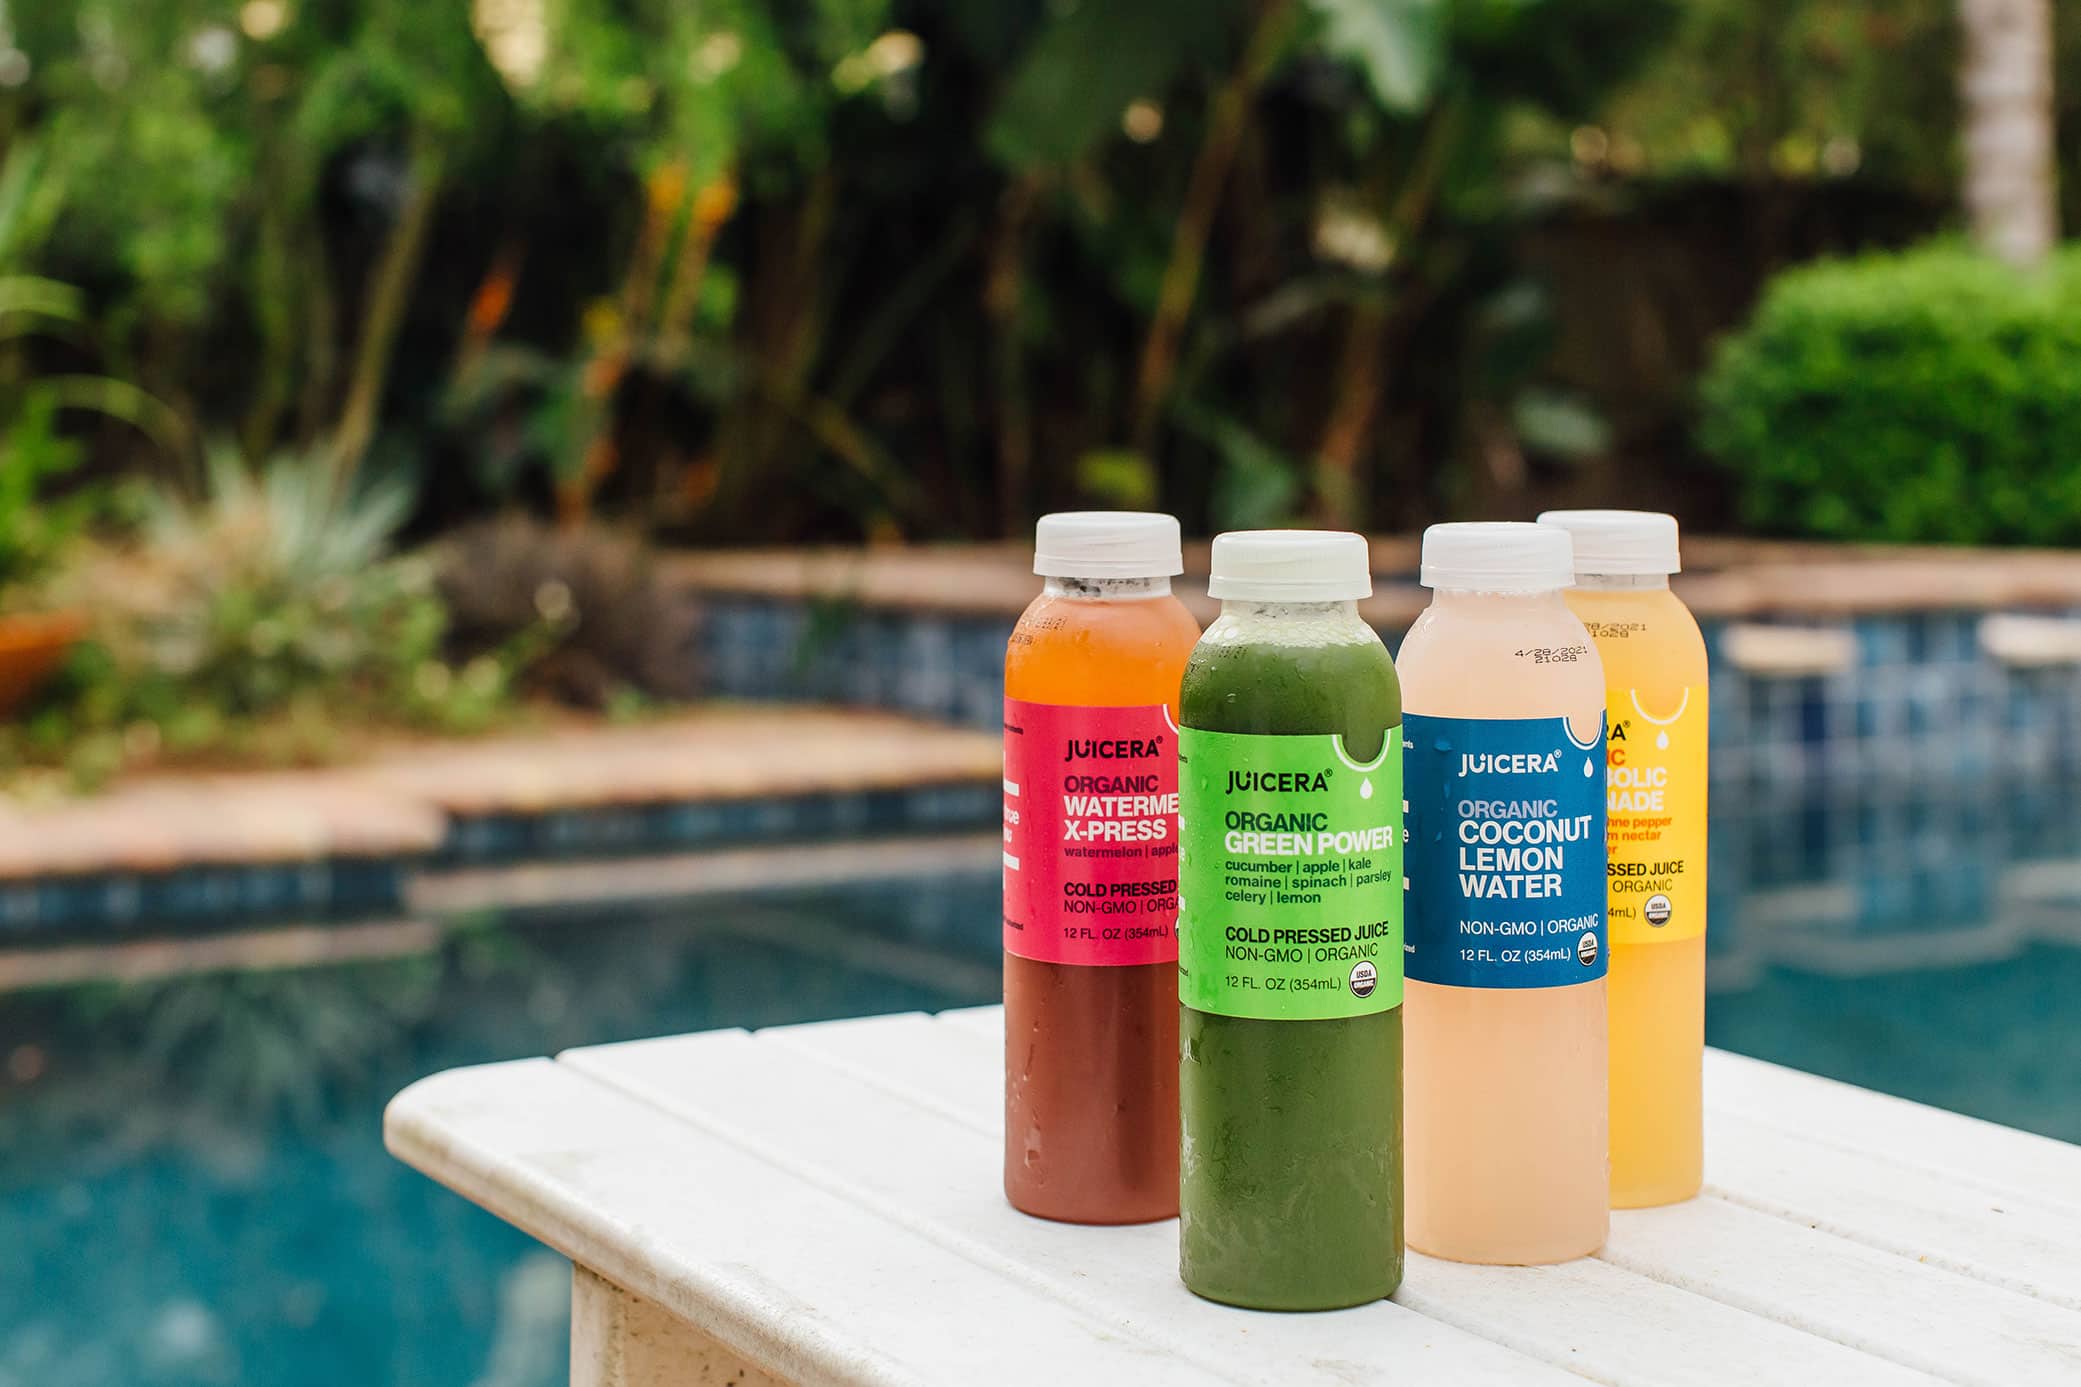 Juicera packaging design showcased poolside with different flavors displayed on a table.